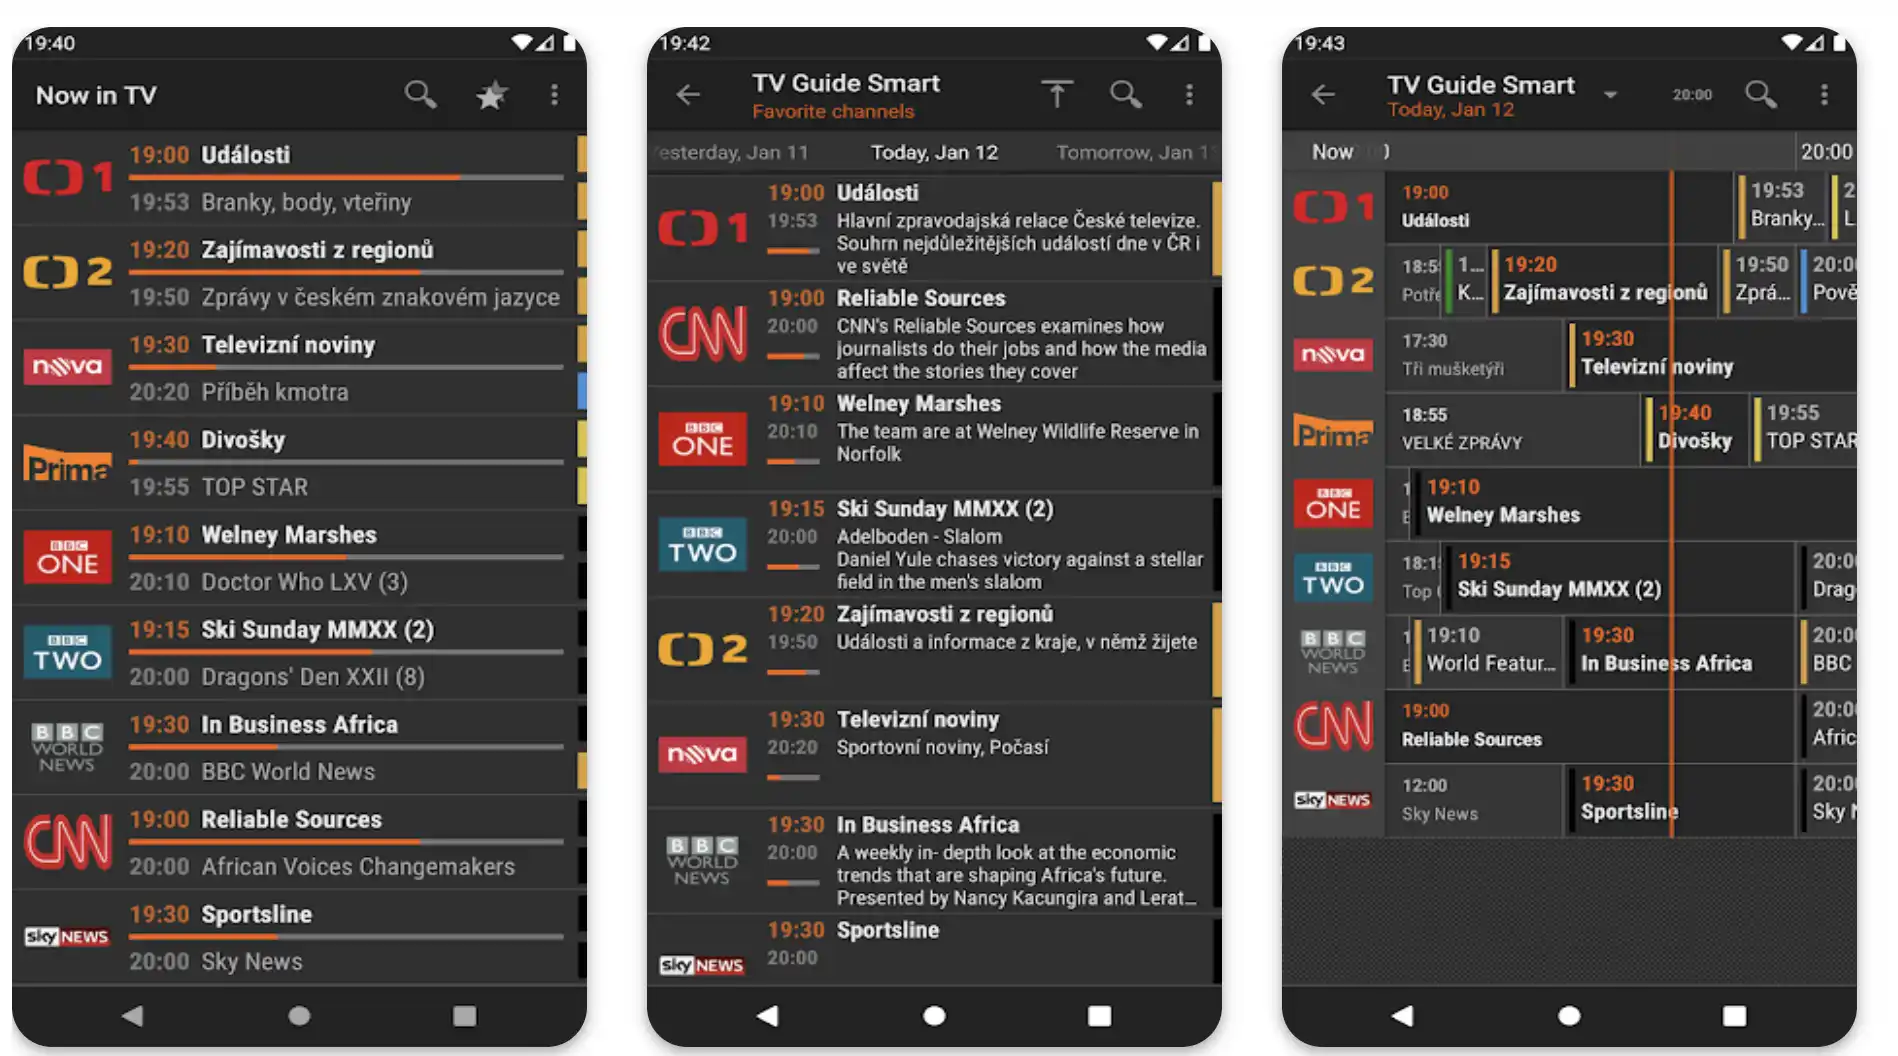 9 Best TV Guide Apps To Track and Discover Shows